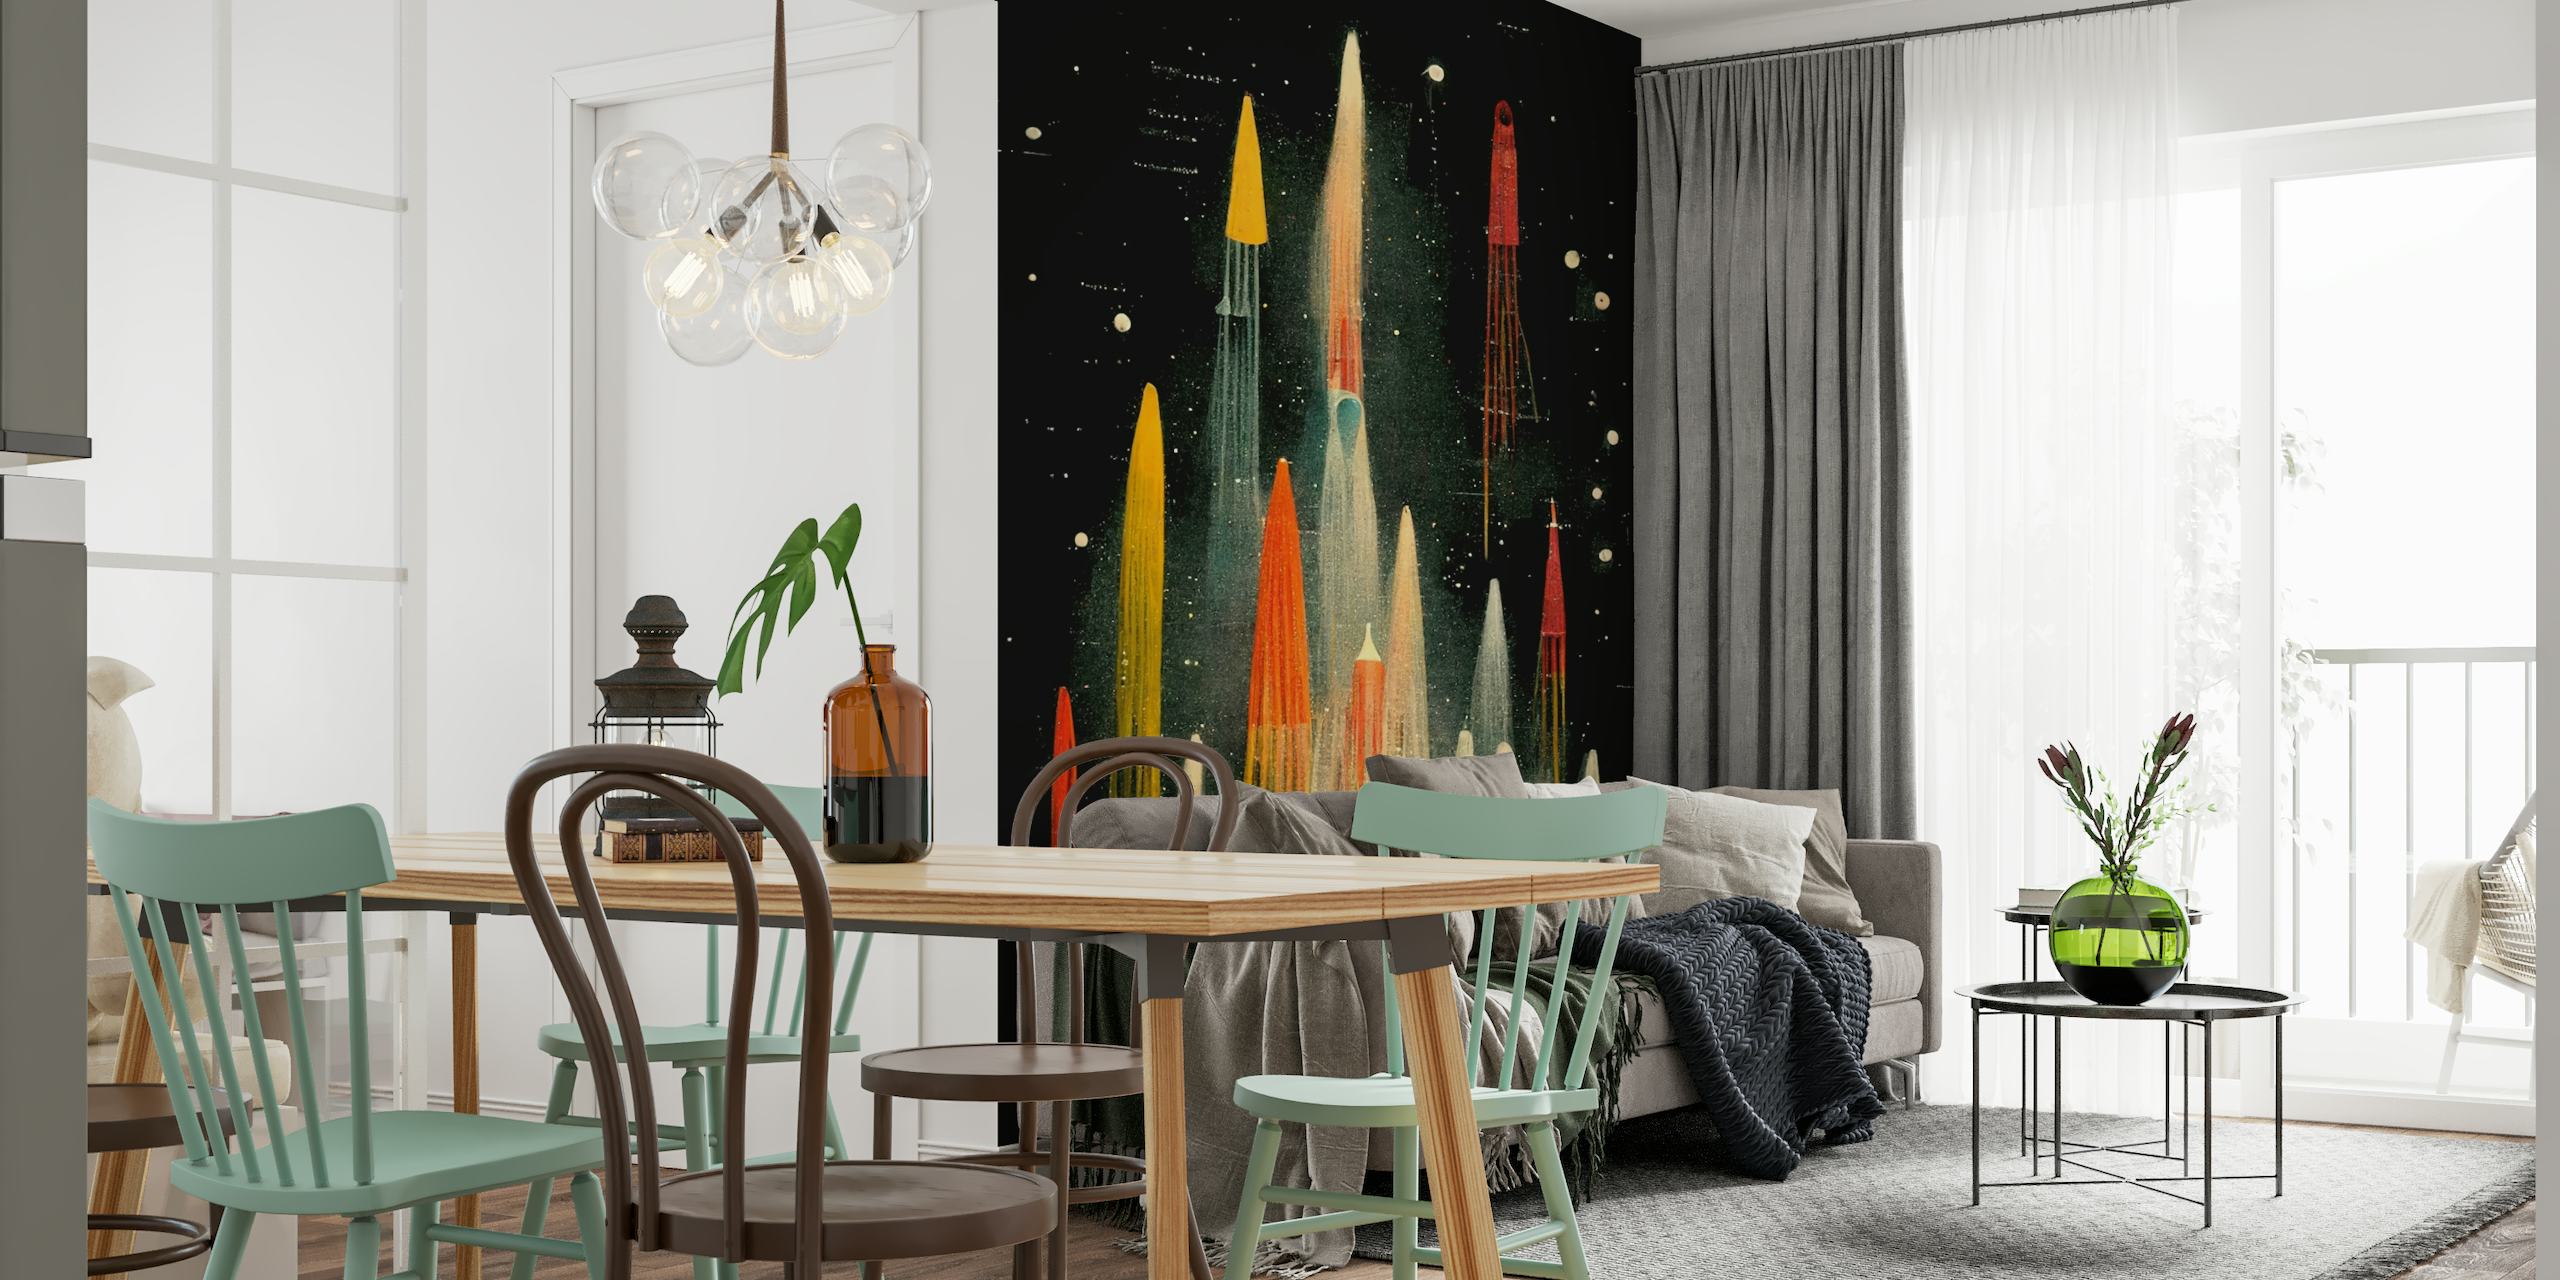 Vintage-style rockets ascending into a starry night sky wall mural